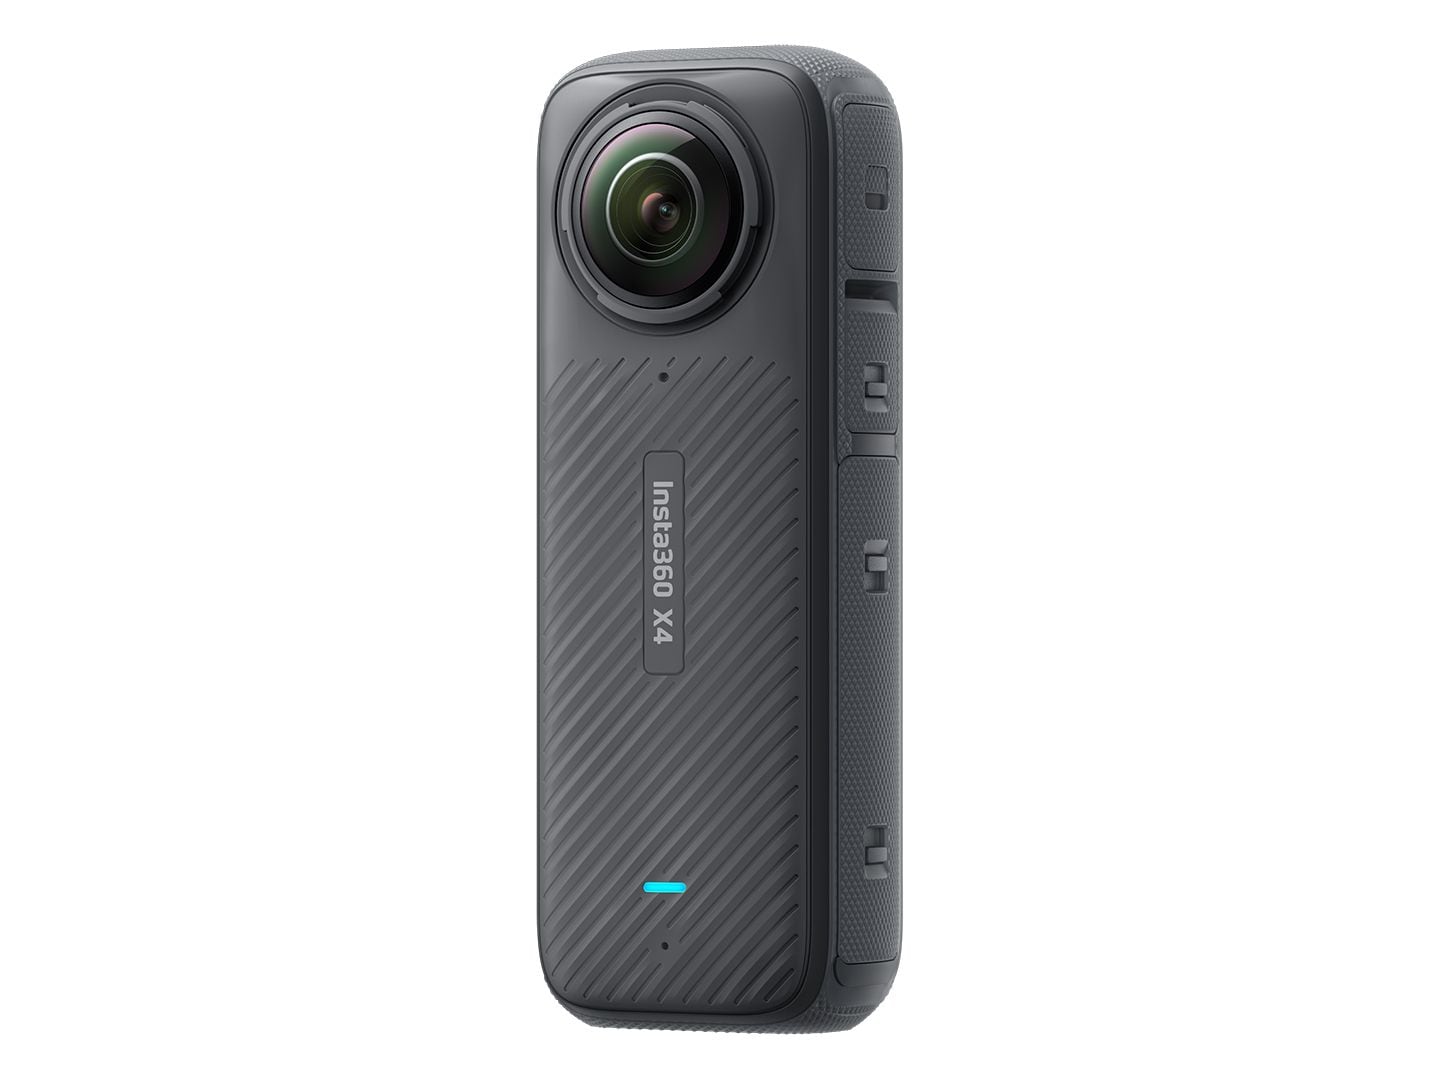 With a wide variety of shooting modes and editing options, the X4 is sure to become a new standard in action camera technology.